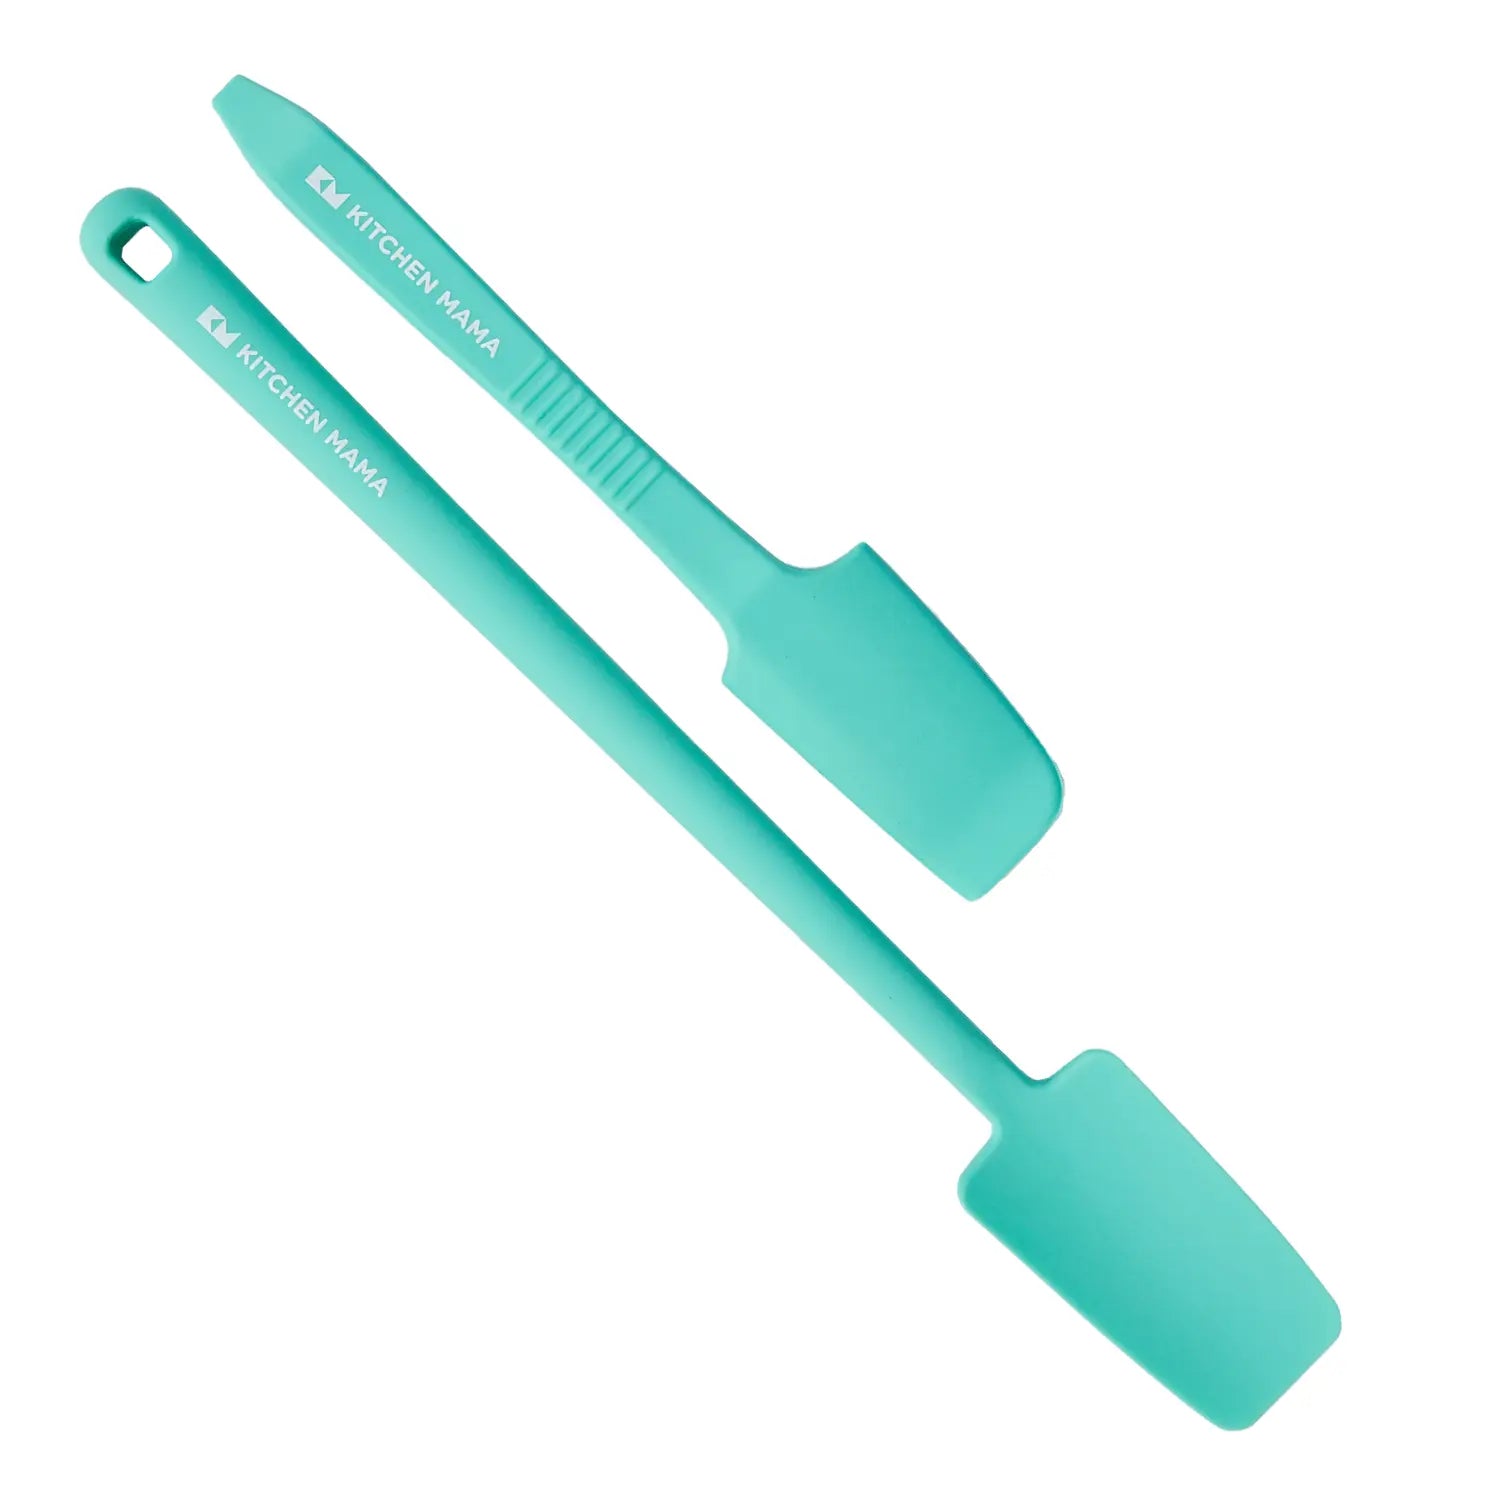 Bpa-free Splatypus Jar Spatula - Fun And Unique Kitchen Gadget For Scooping  And Scraping - 100% Food Safe And Perfect For Crepe Spreading - Temu  Portugal